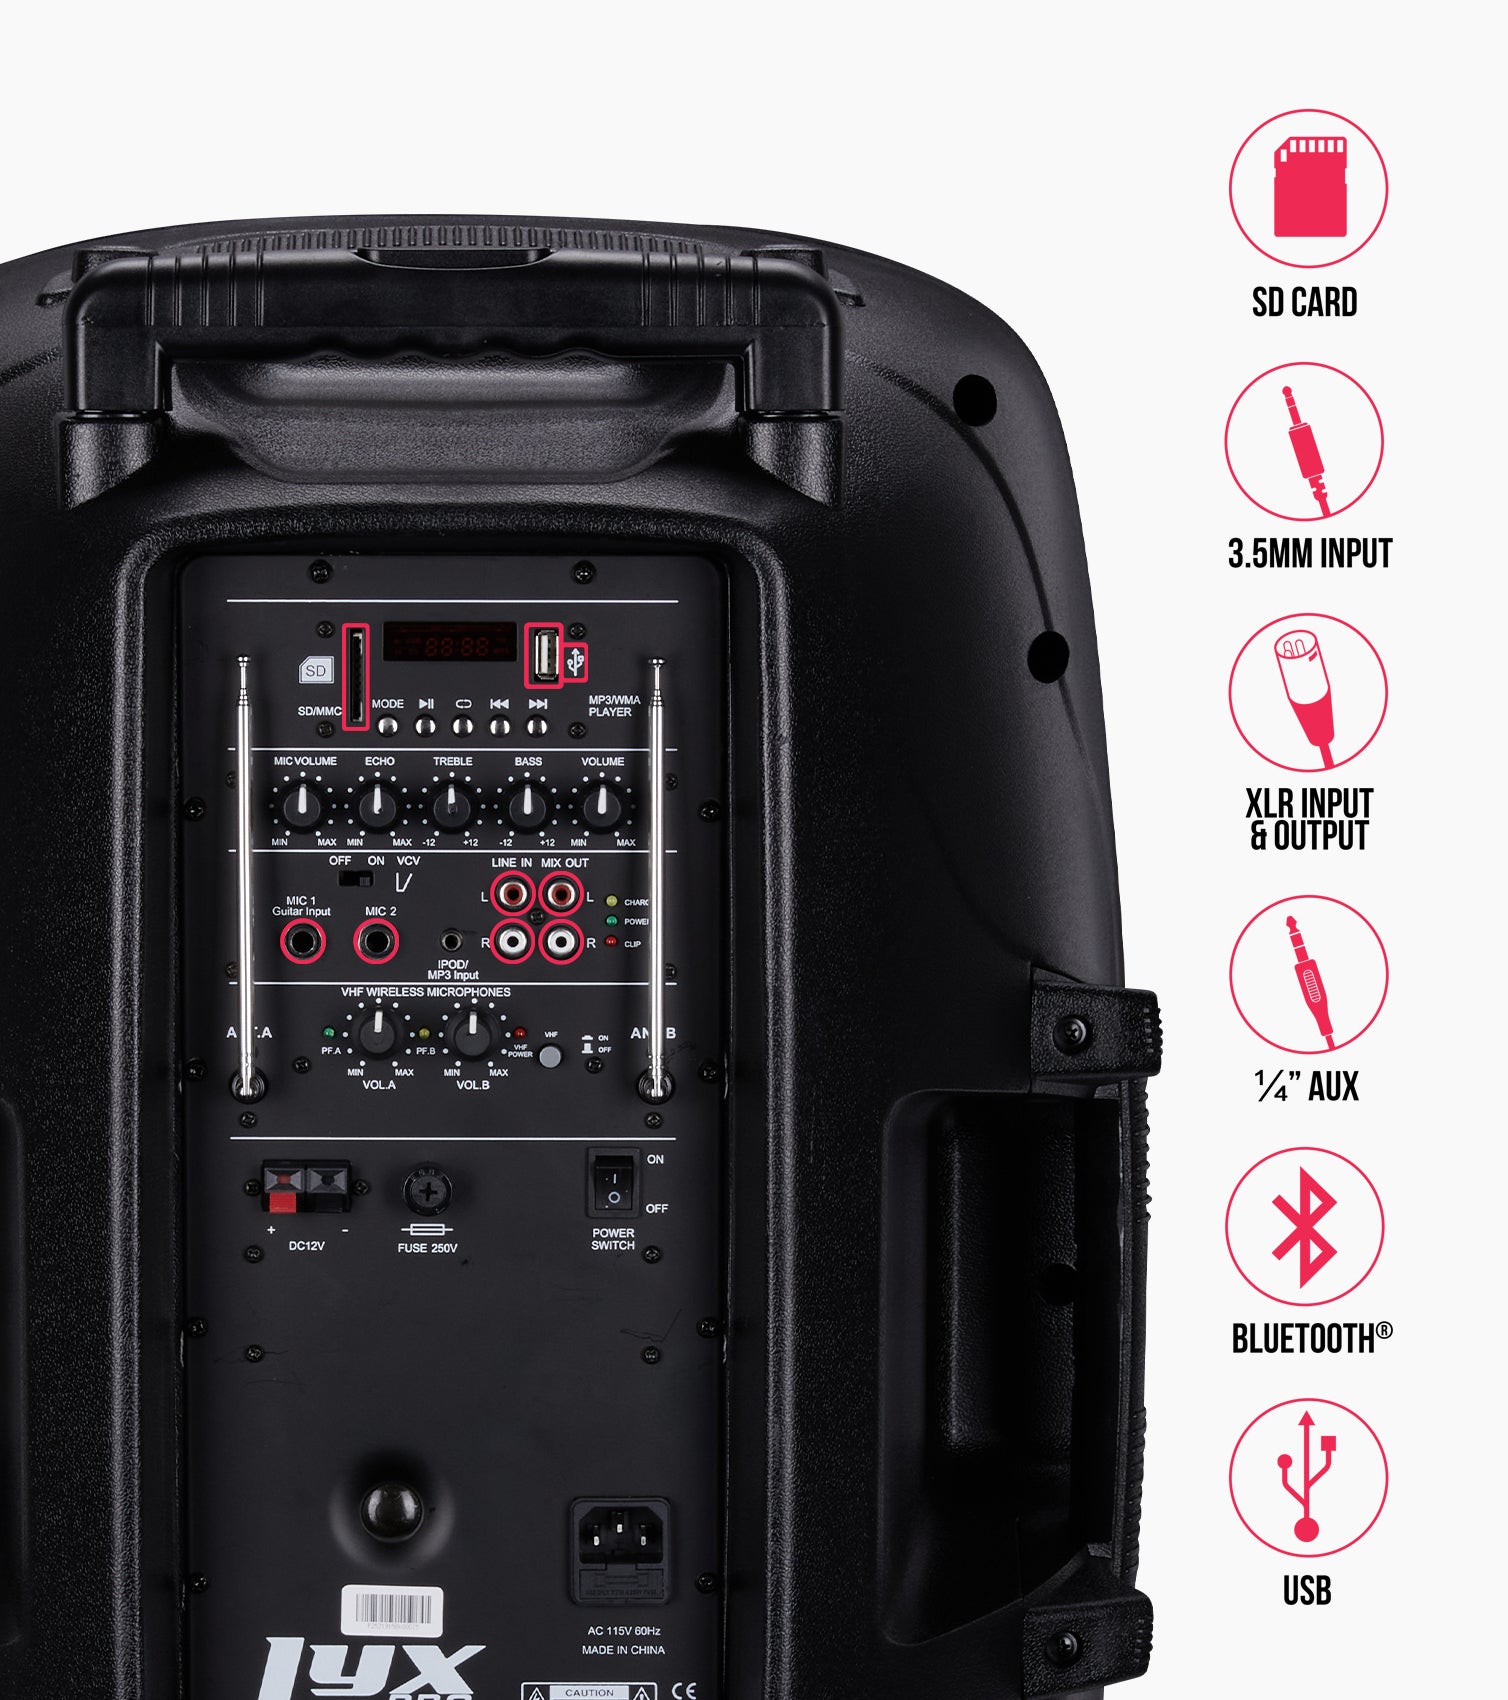 12” portable battery-powered PA speaker control panel